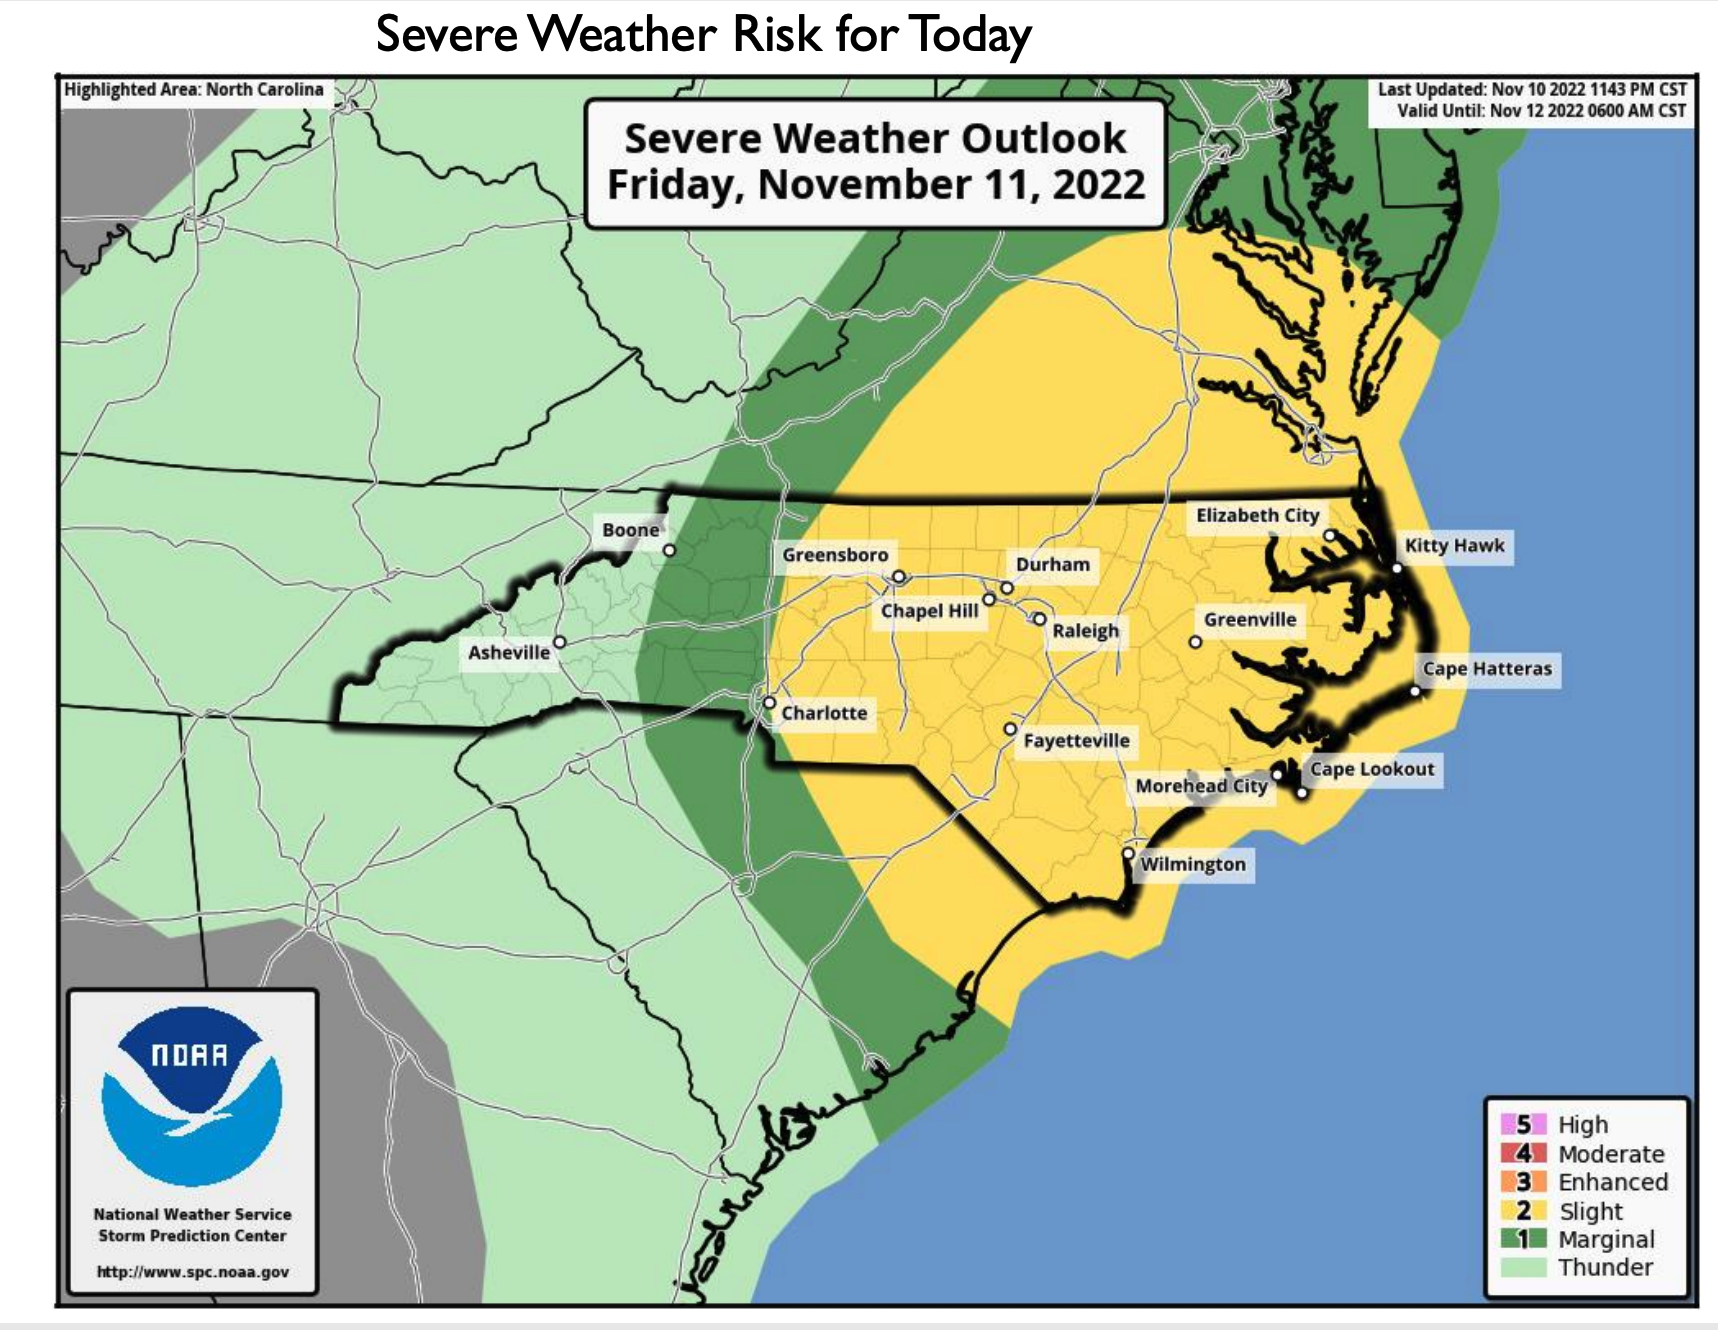 Graphic of severe weather risk in N.C.